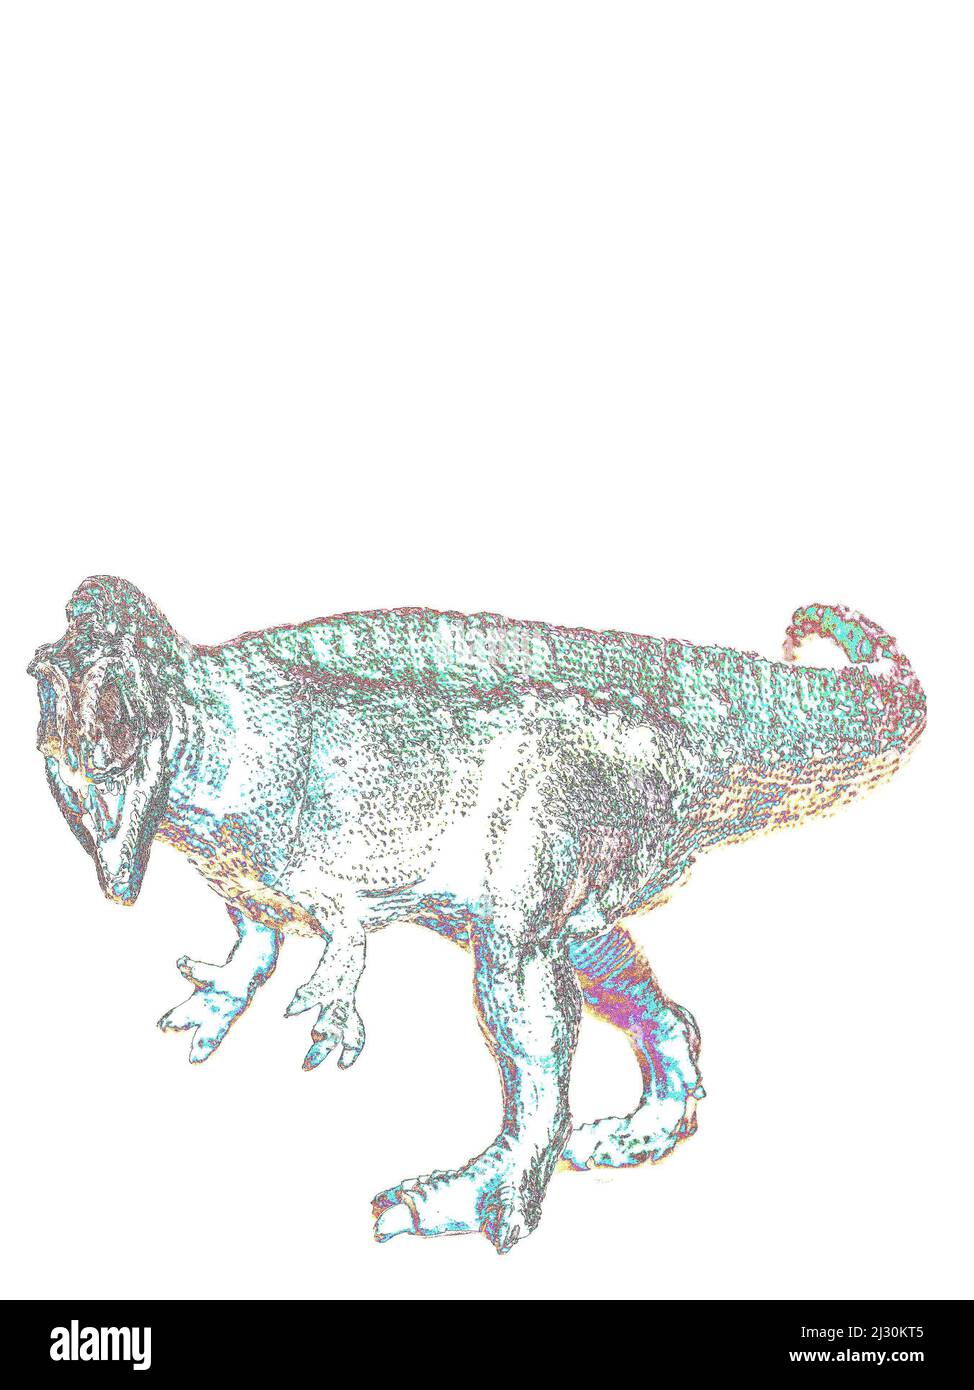 processed image of a plastic toy dinosaur Stock Photo